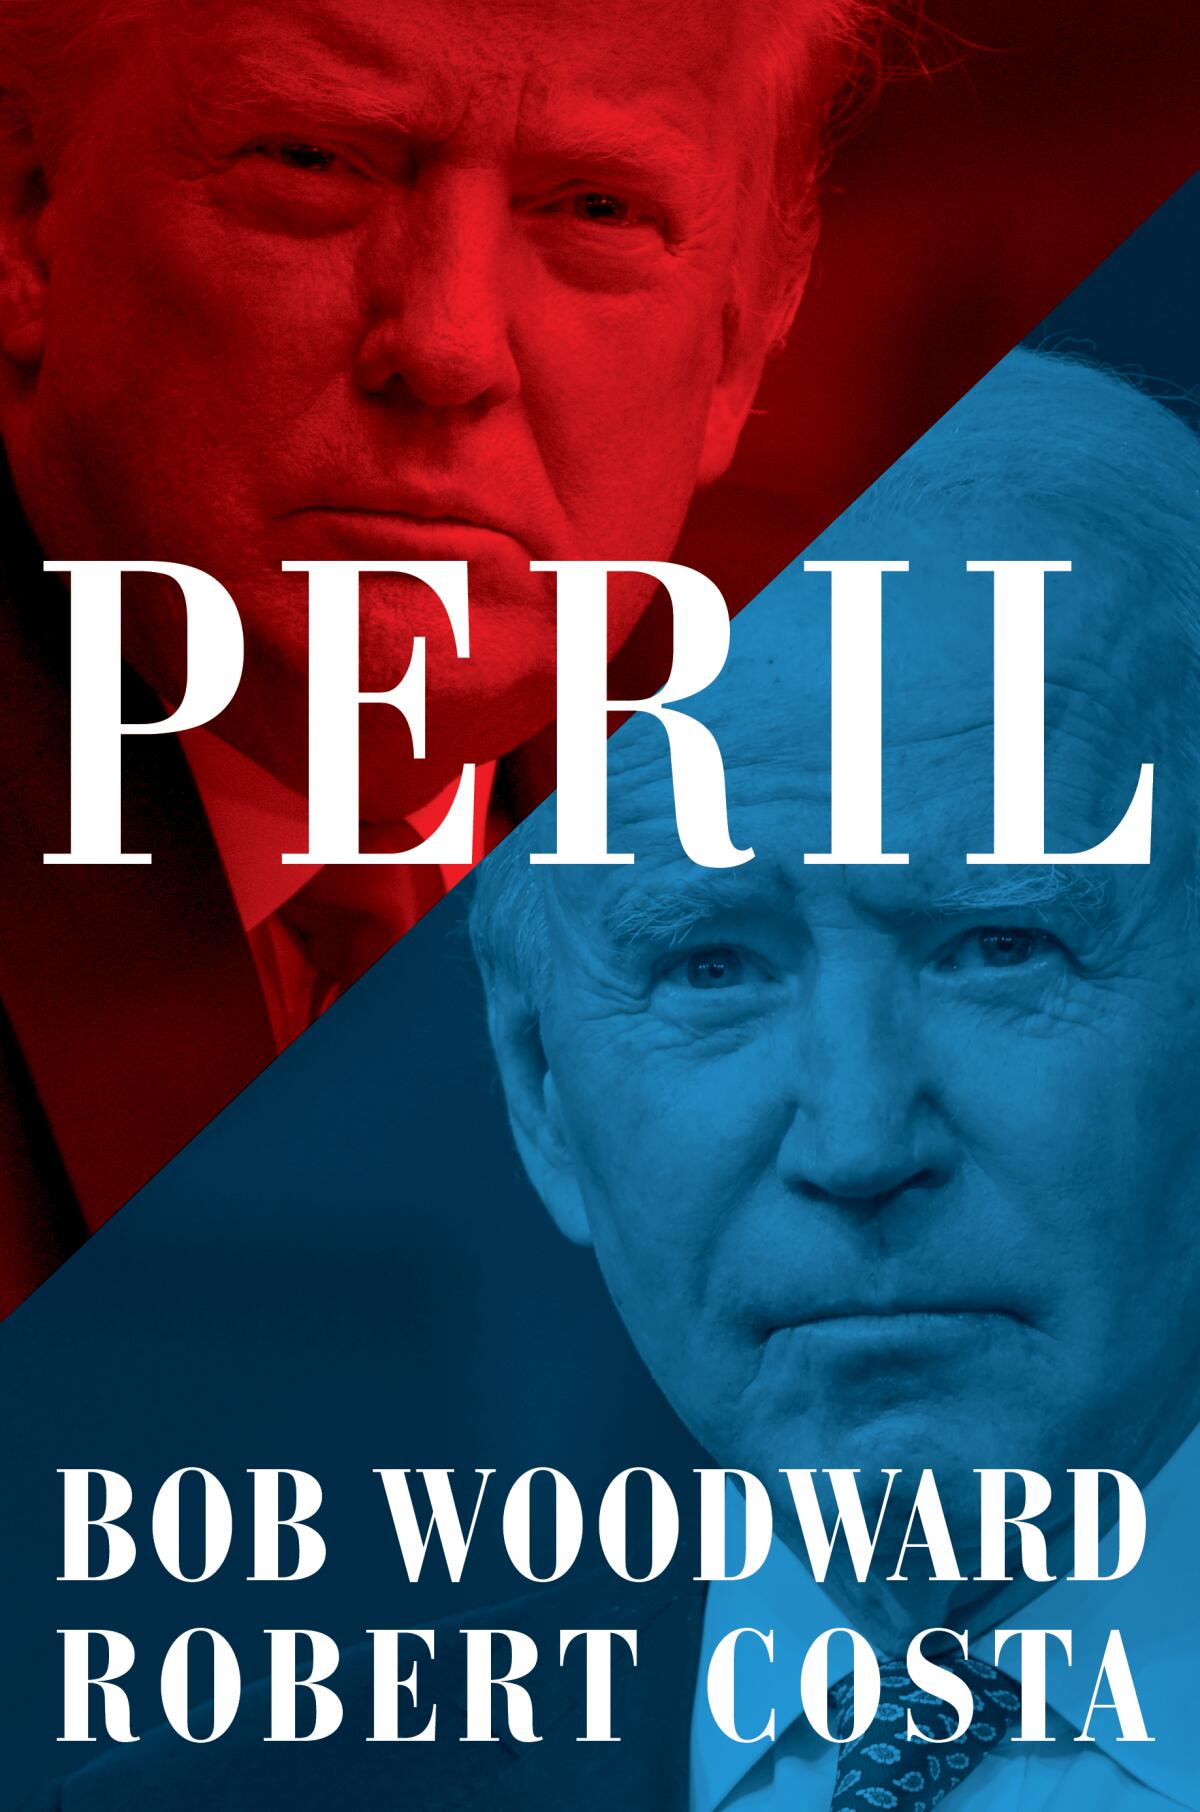 President Trump and President Biden are both on the cover of Bob Woodward and Robert Costa's "Peril"